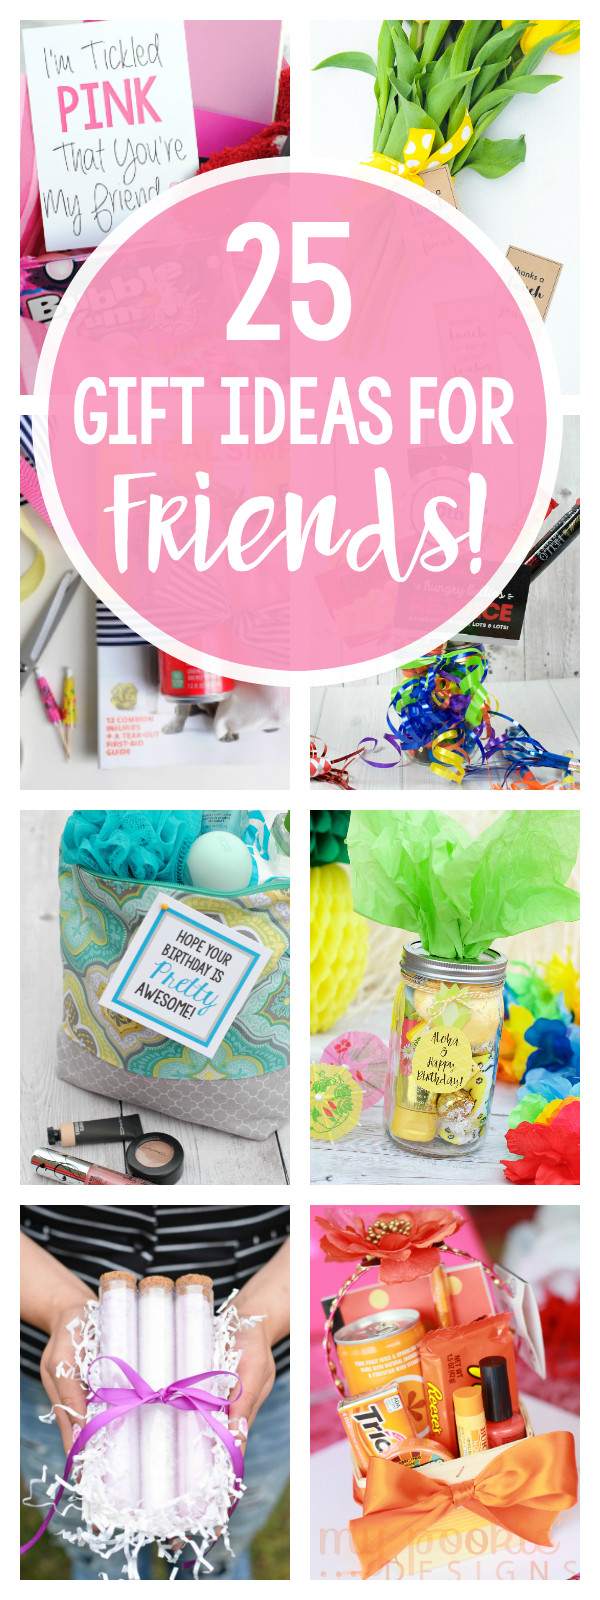 Best Friend Gift Ideas Pinterest
 25 Gifts Ideas for Friends – Fun Squared